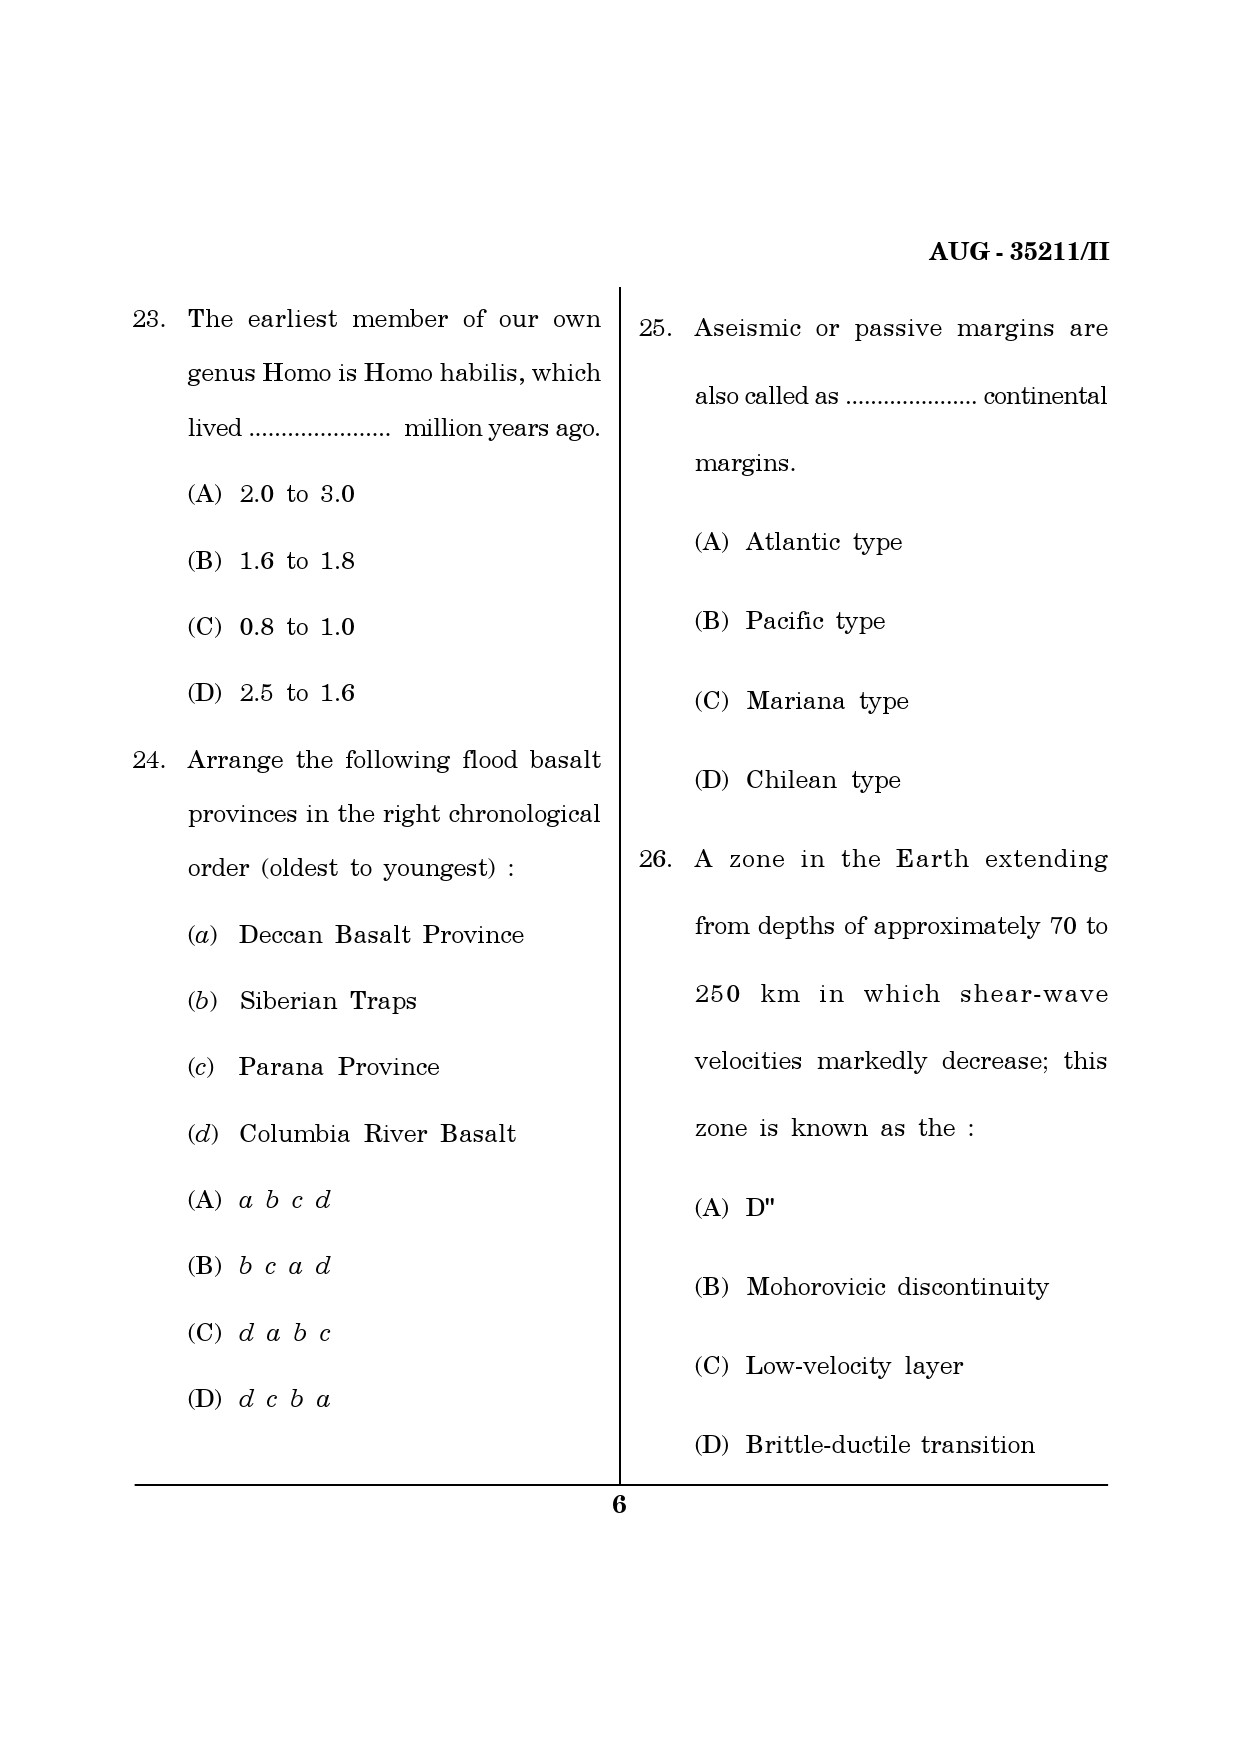 Maharashtra SET Earth Atmospheric Ocean Planetary Science Question Paper II August 2011 6